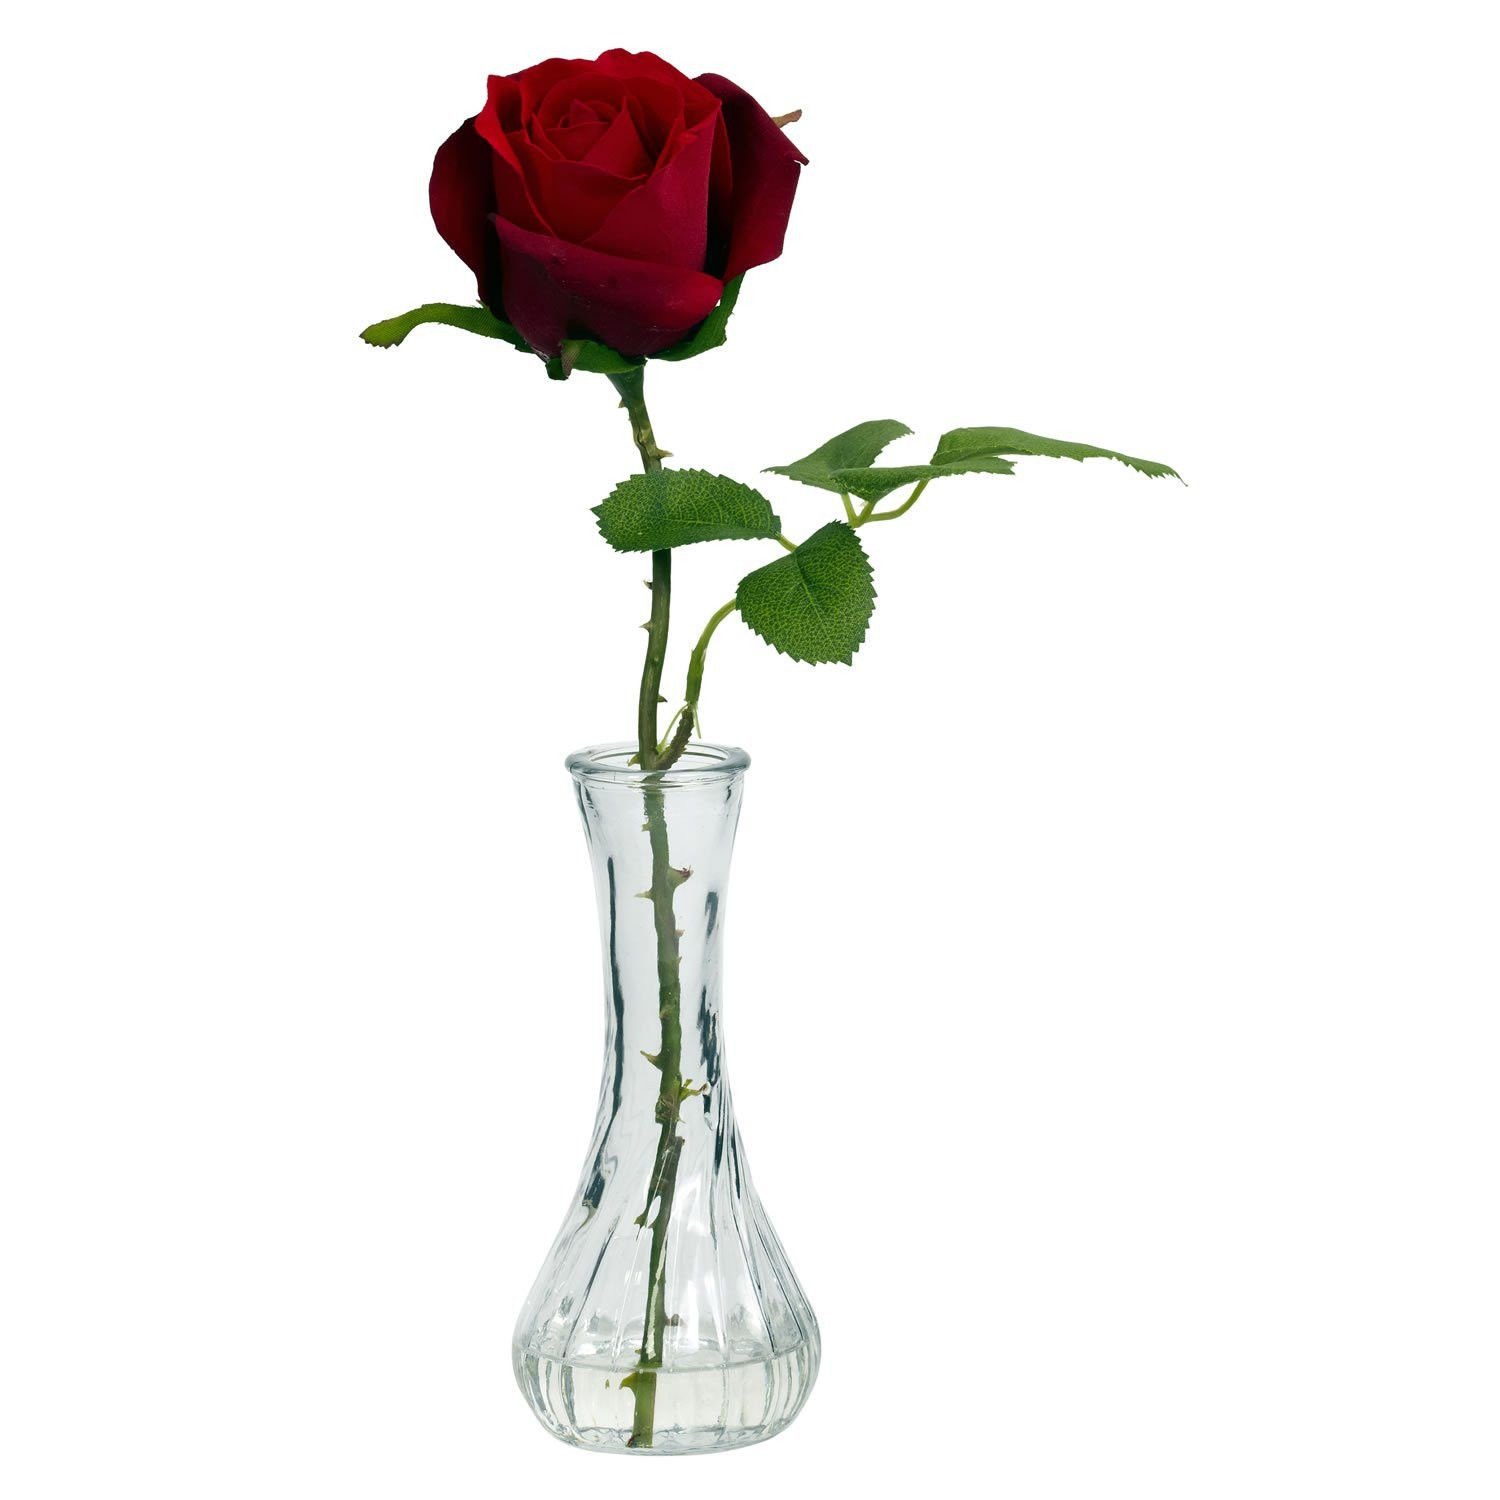 30 Stunning White Flowers In Clear Vase 2024 free download white flowers in clear vase of pictures of roses in a vase inspirational vase redh vases single in pictures of roses in a vase inspirational vase redh vases single rose in vasei 0d a